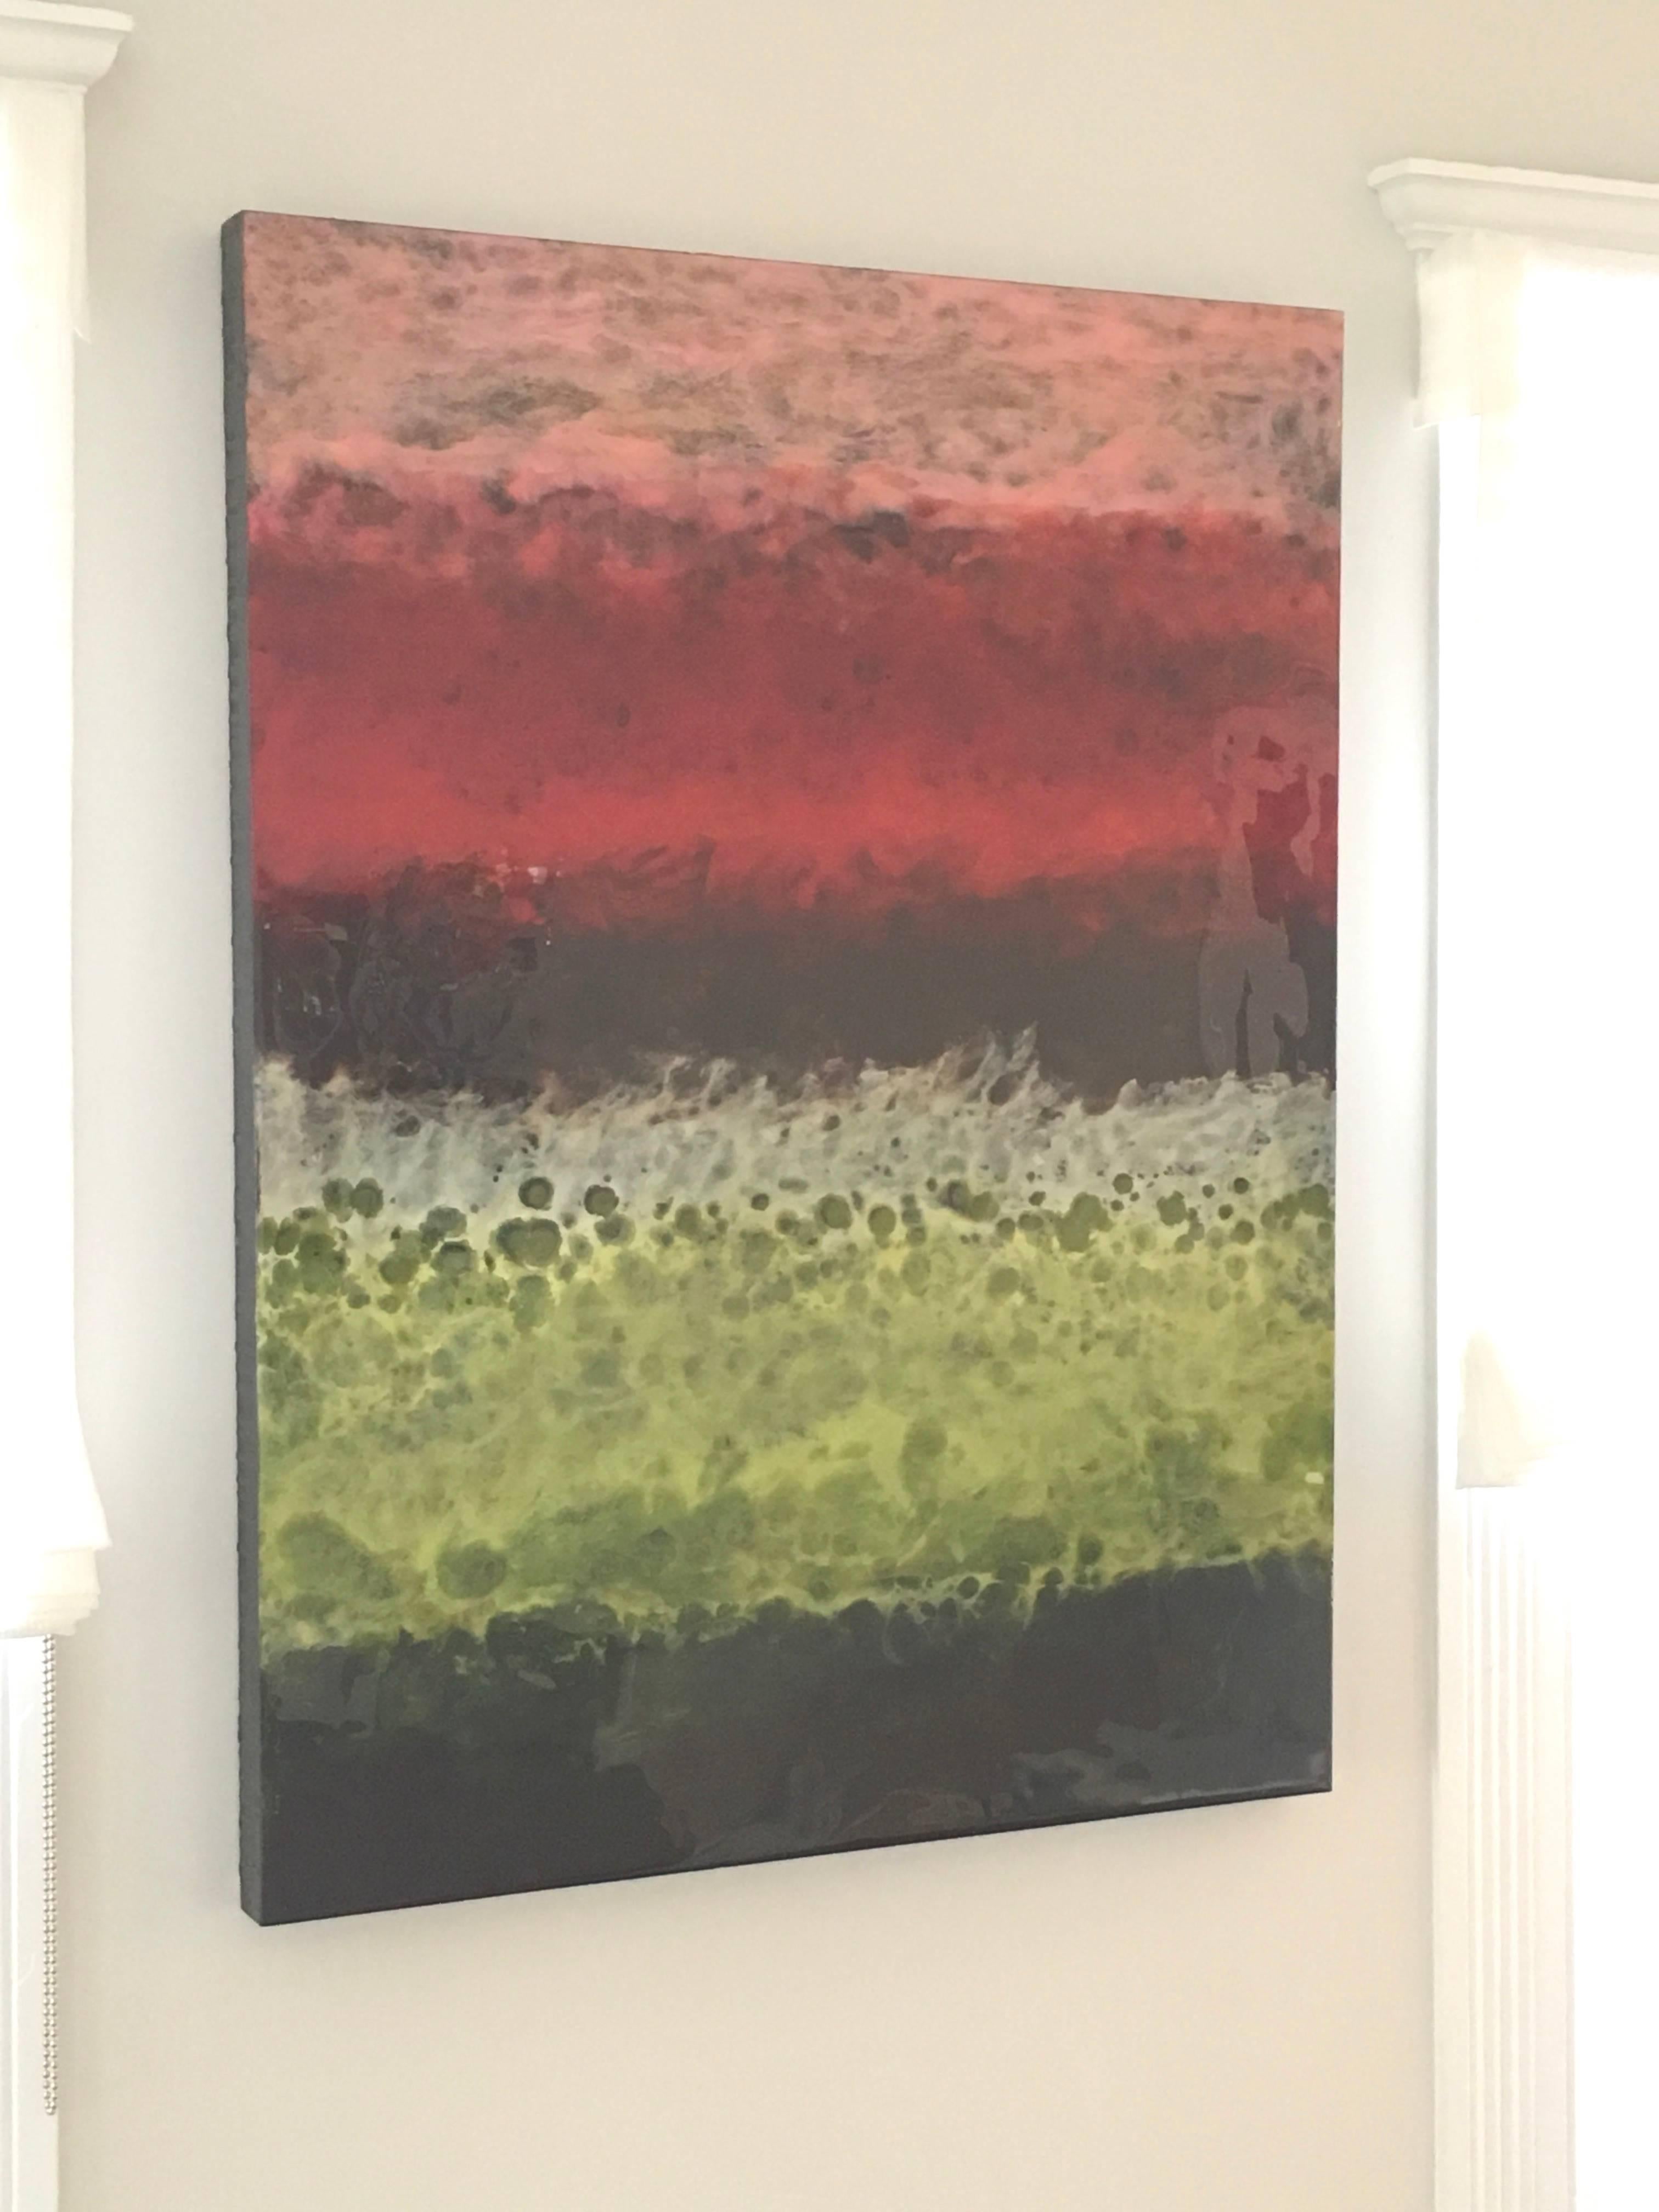 Blanes, Abstract, Vertical, Colorful, Hi-gloss finish, Wood Panel, Vertical - Painting by Marie Danielle Leblanc